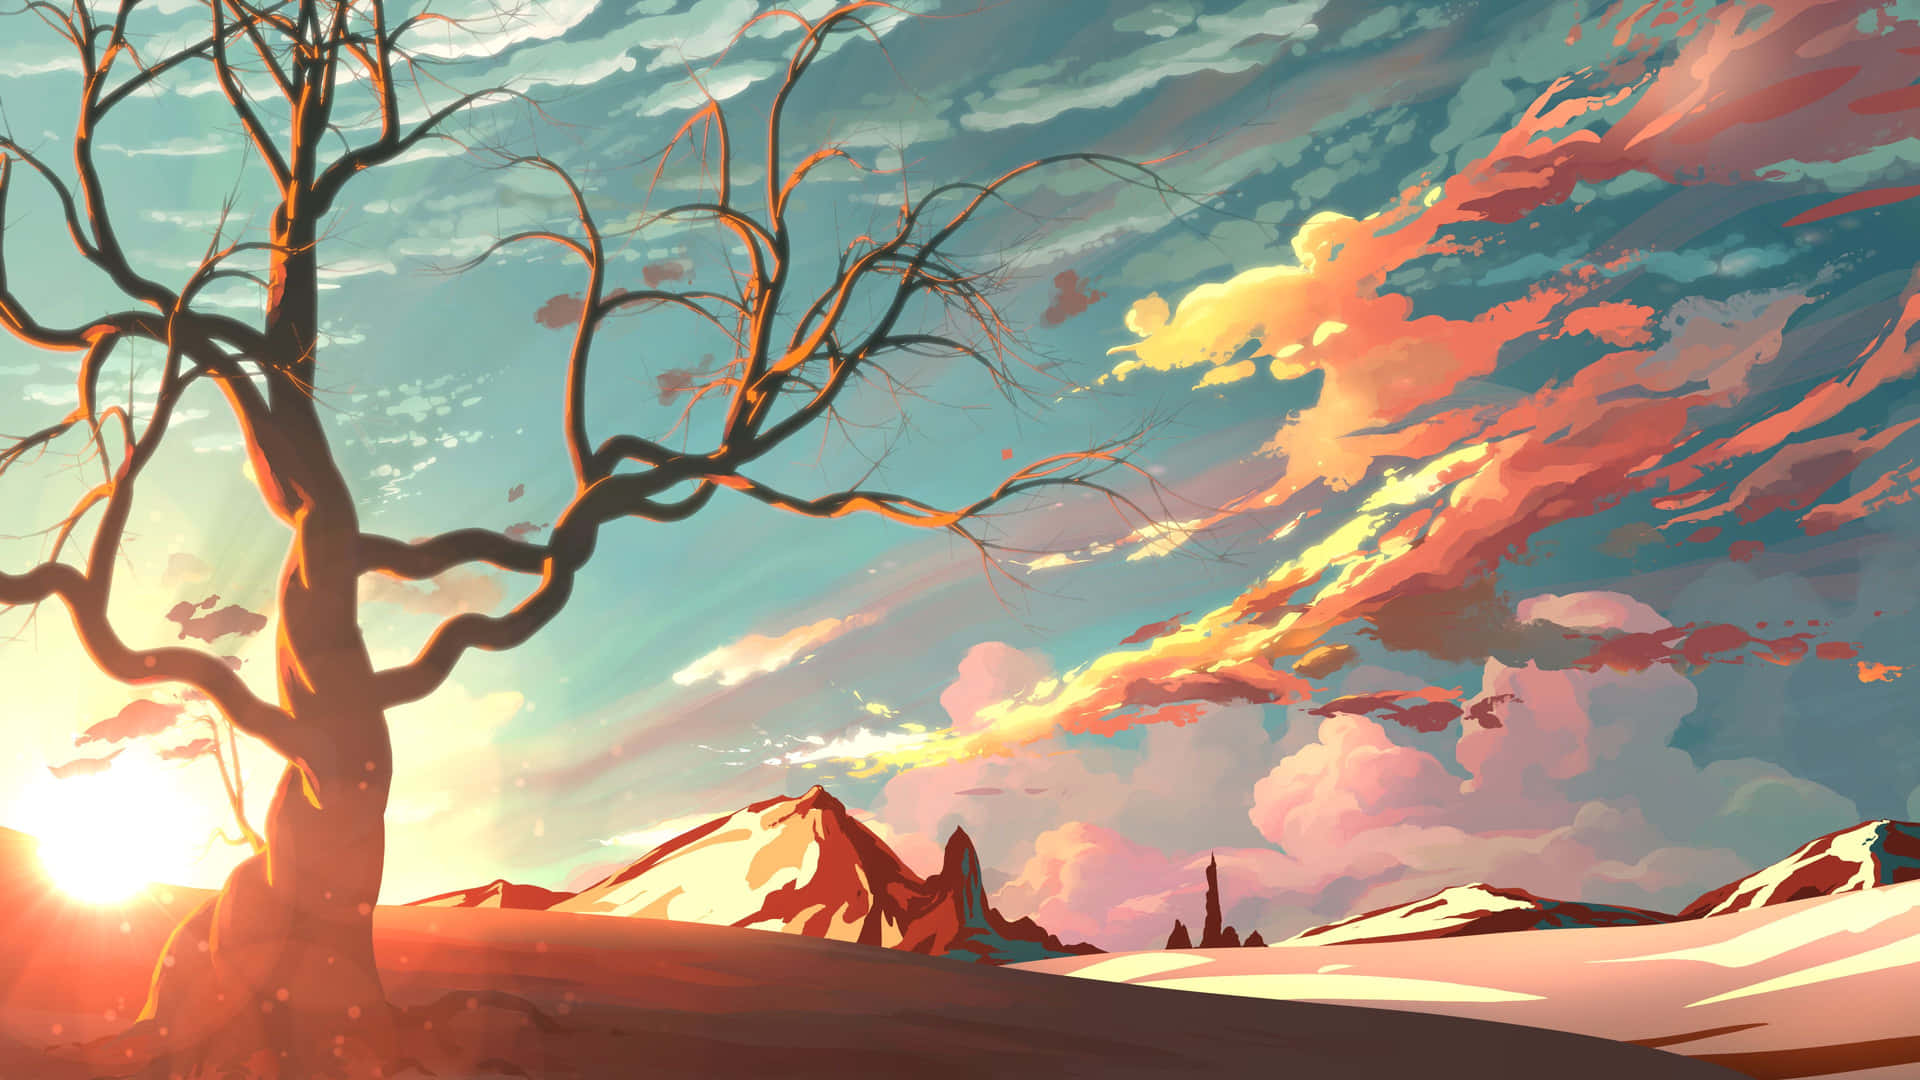 Imaginary Worlds Come to Life in This Anime Art